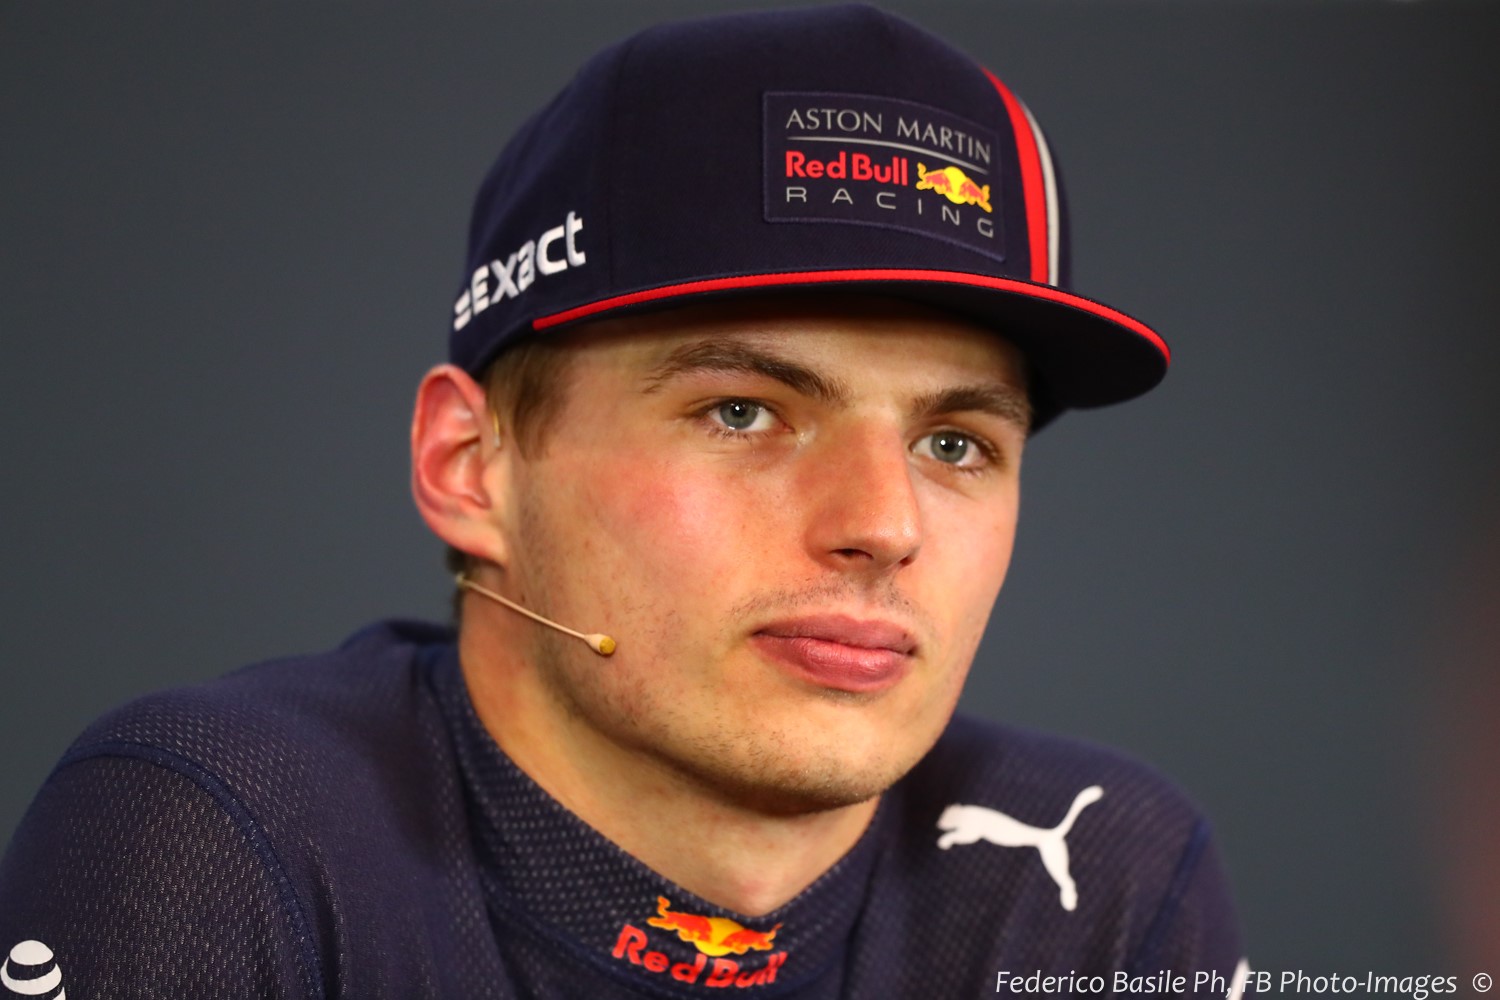 Max Verstappen thinks if his car is within 3/10ths of the Mercedes he can beat Hamilton with his talent